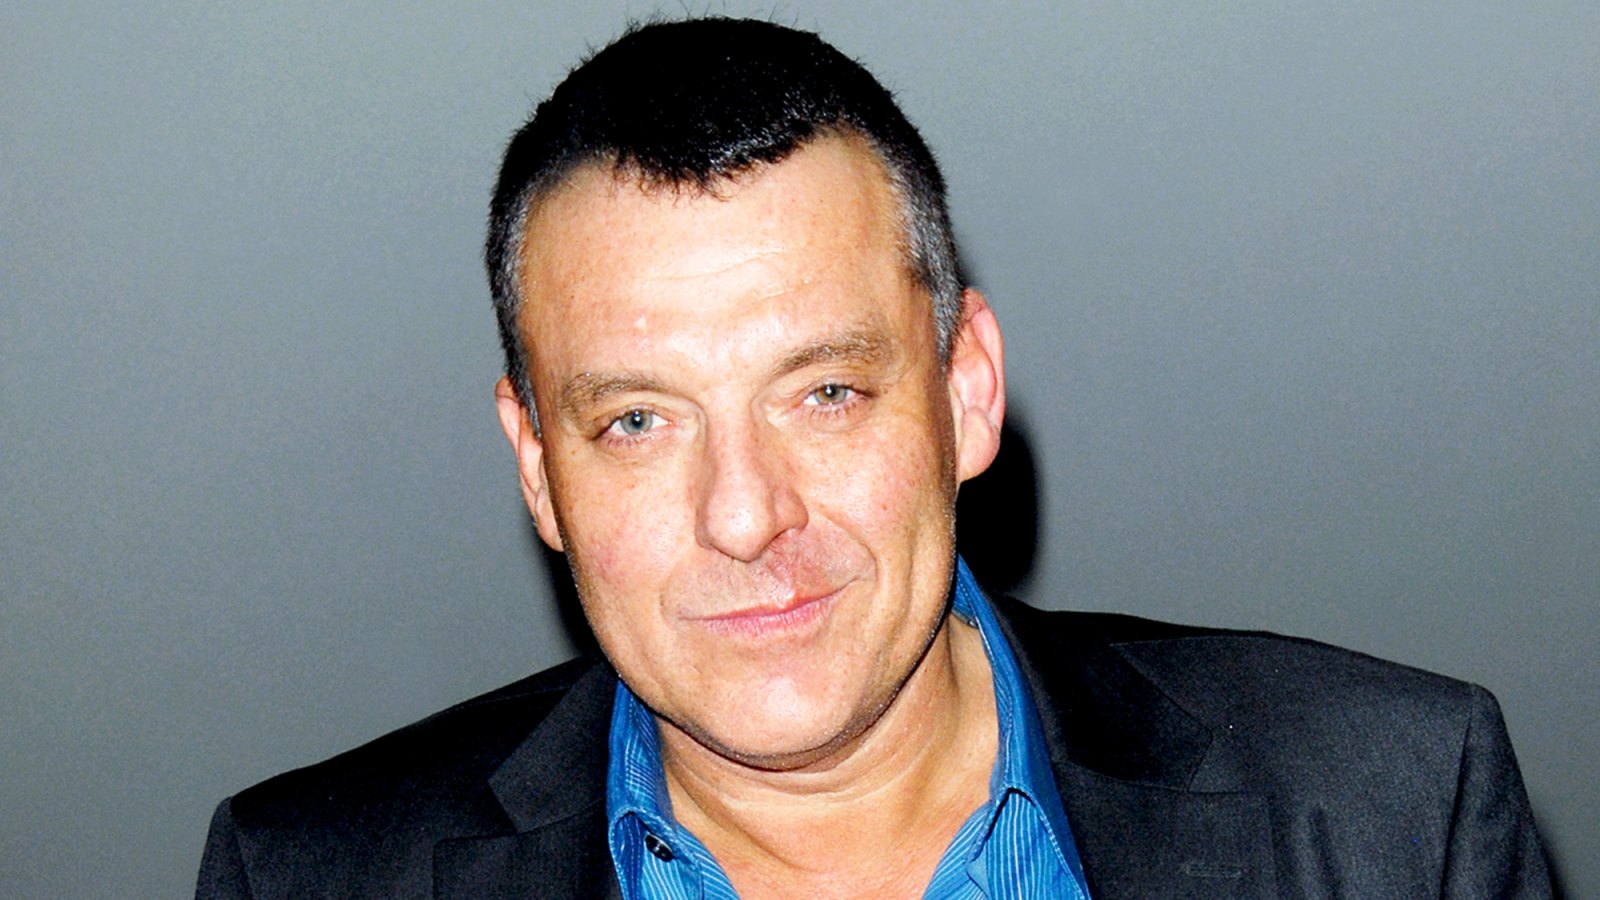 Tom Sizemore attends the "Genius On Hold" screening and Q&A at Landmark Nuart Theatre in Los Angeles, California.